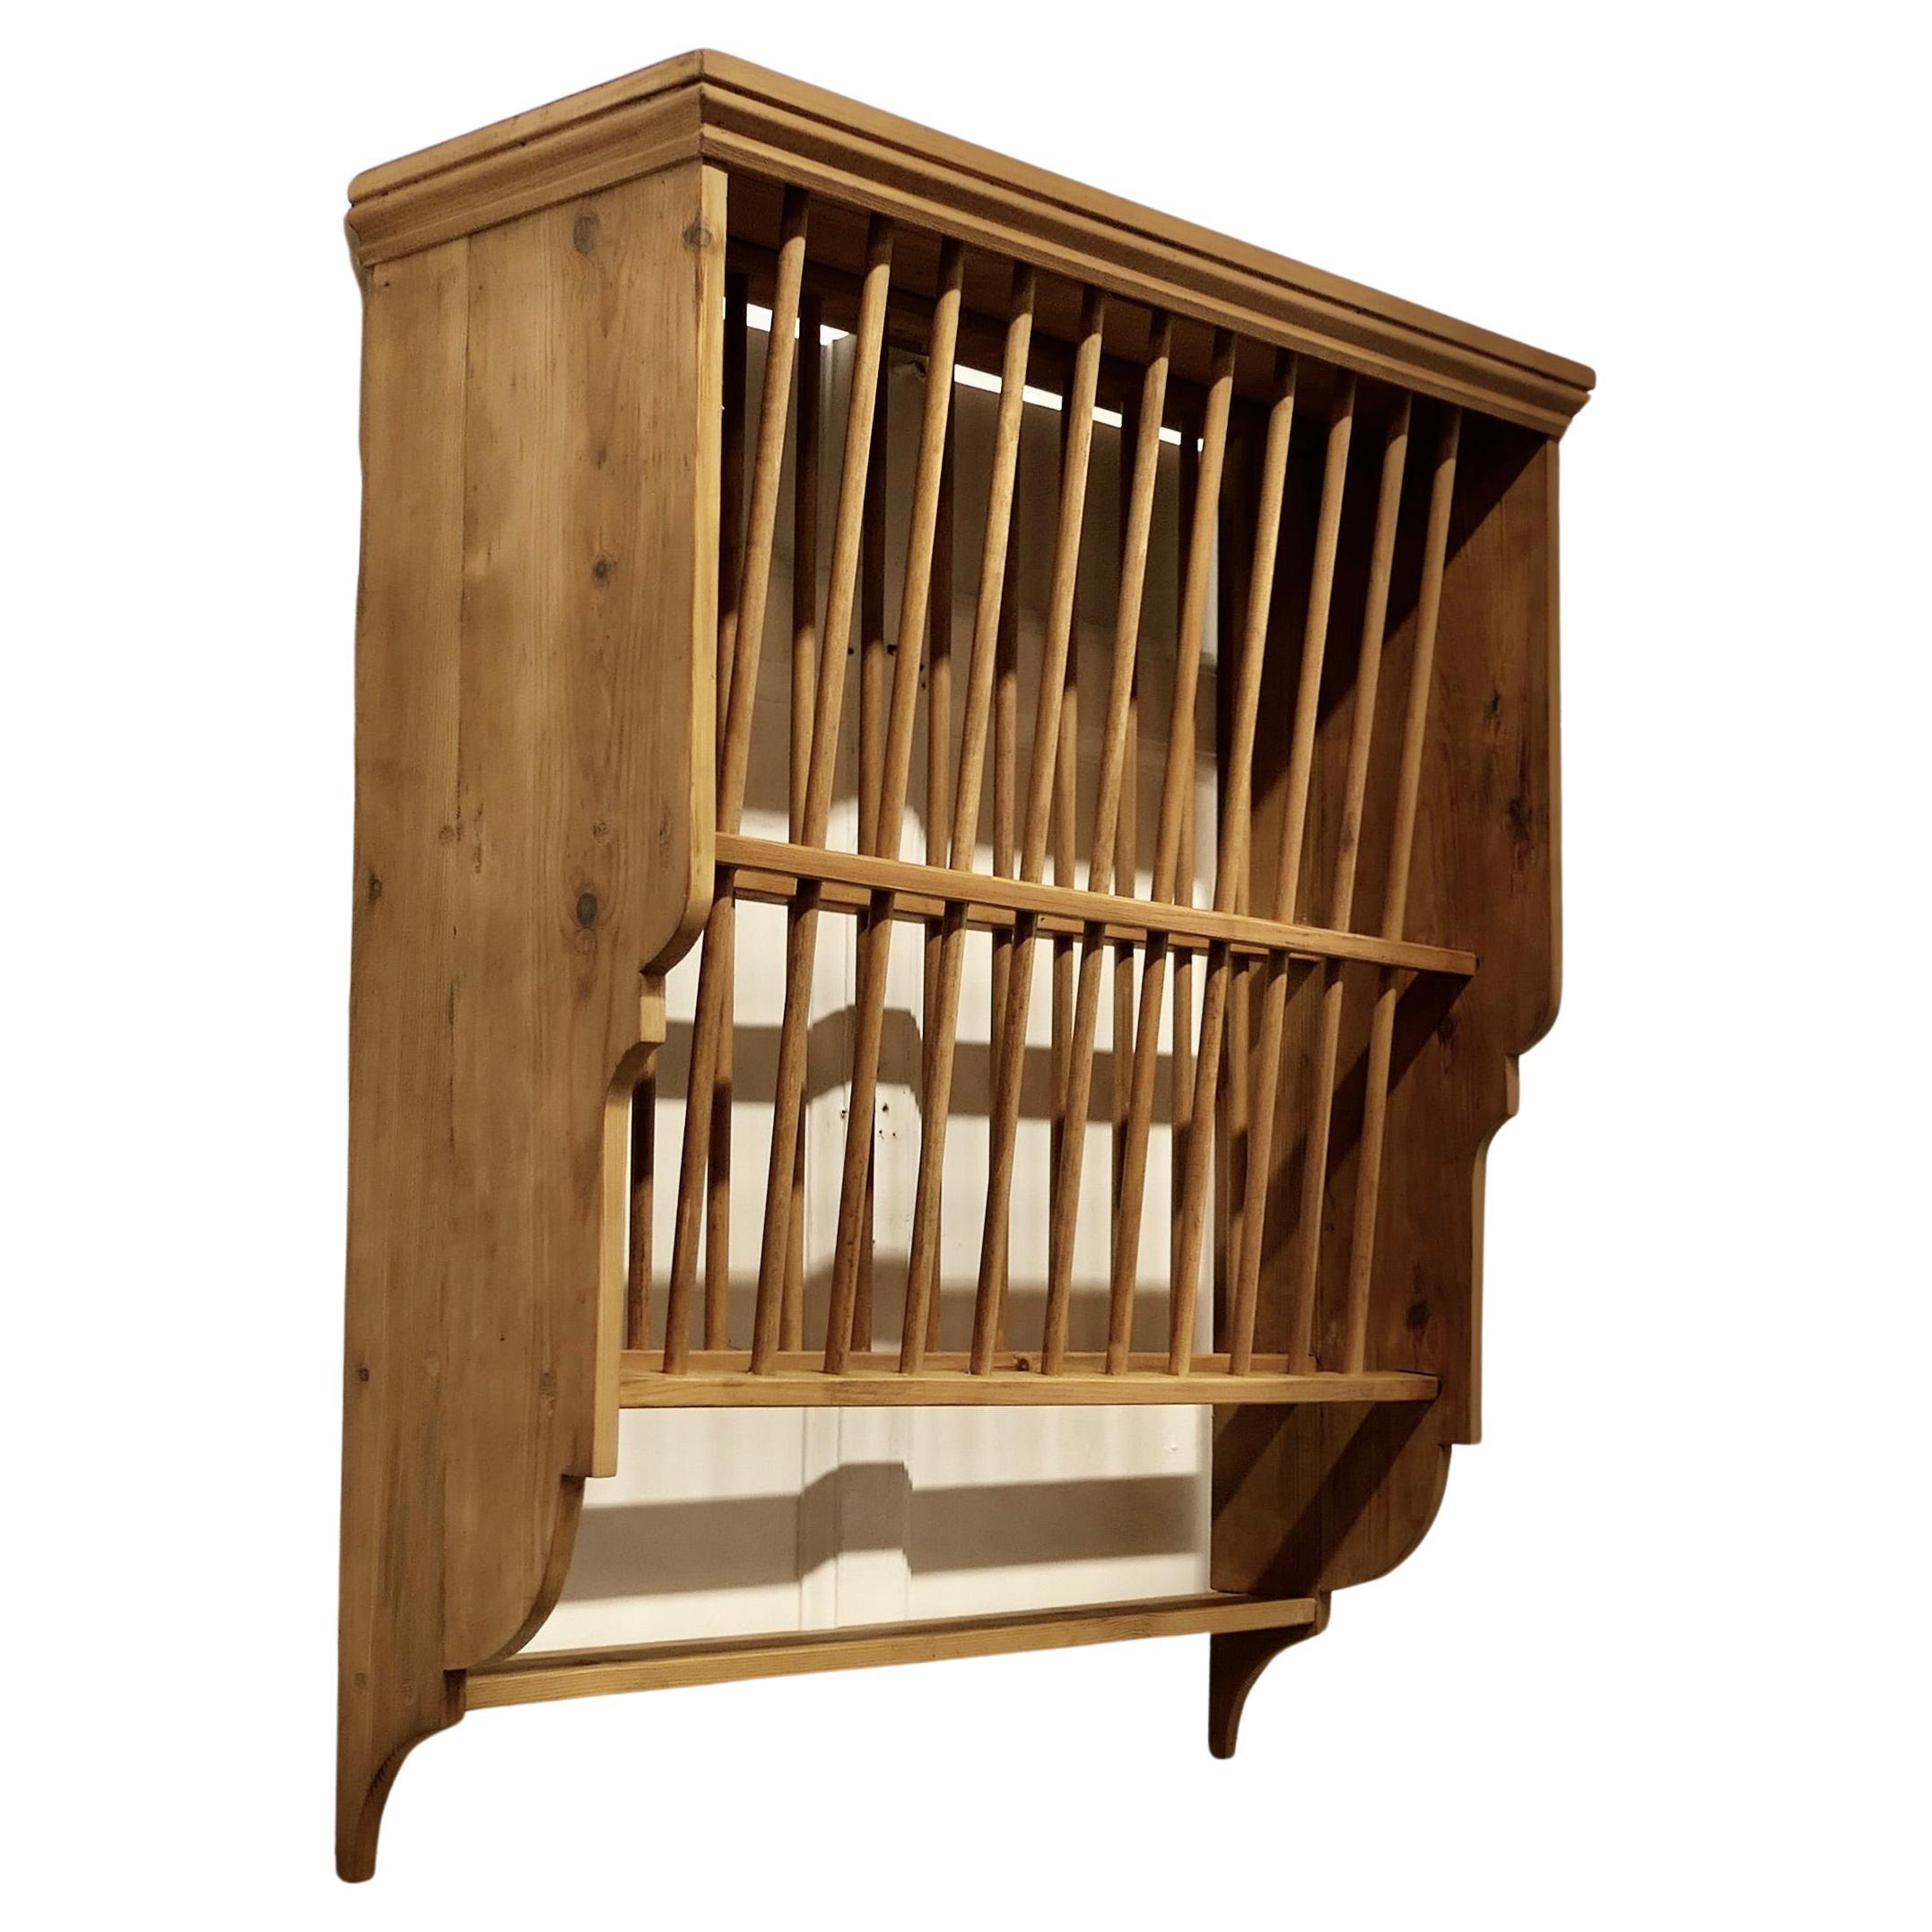 A Large Wall Hanging Pine Plate Rack